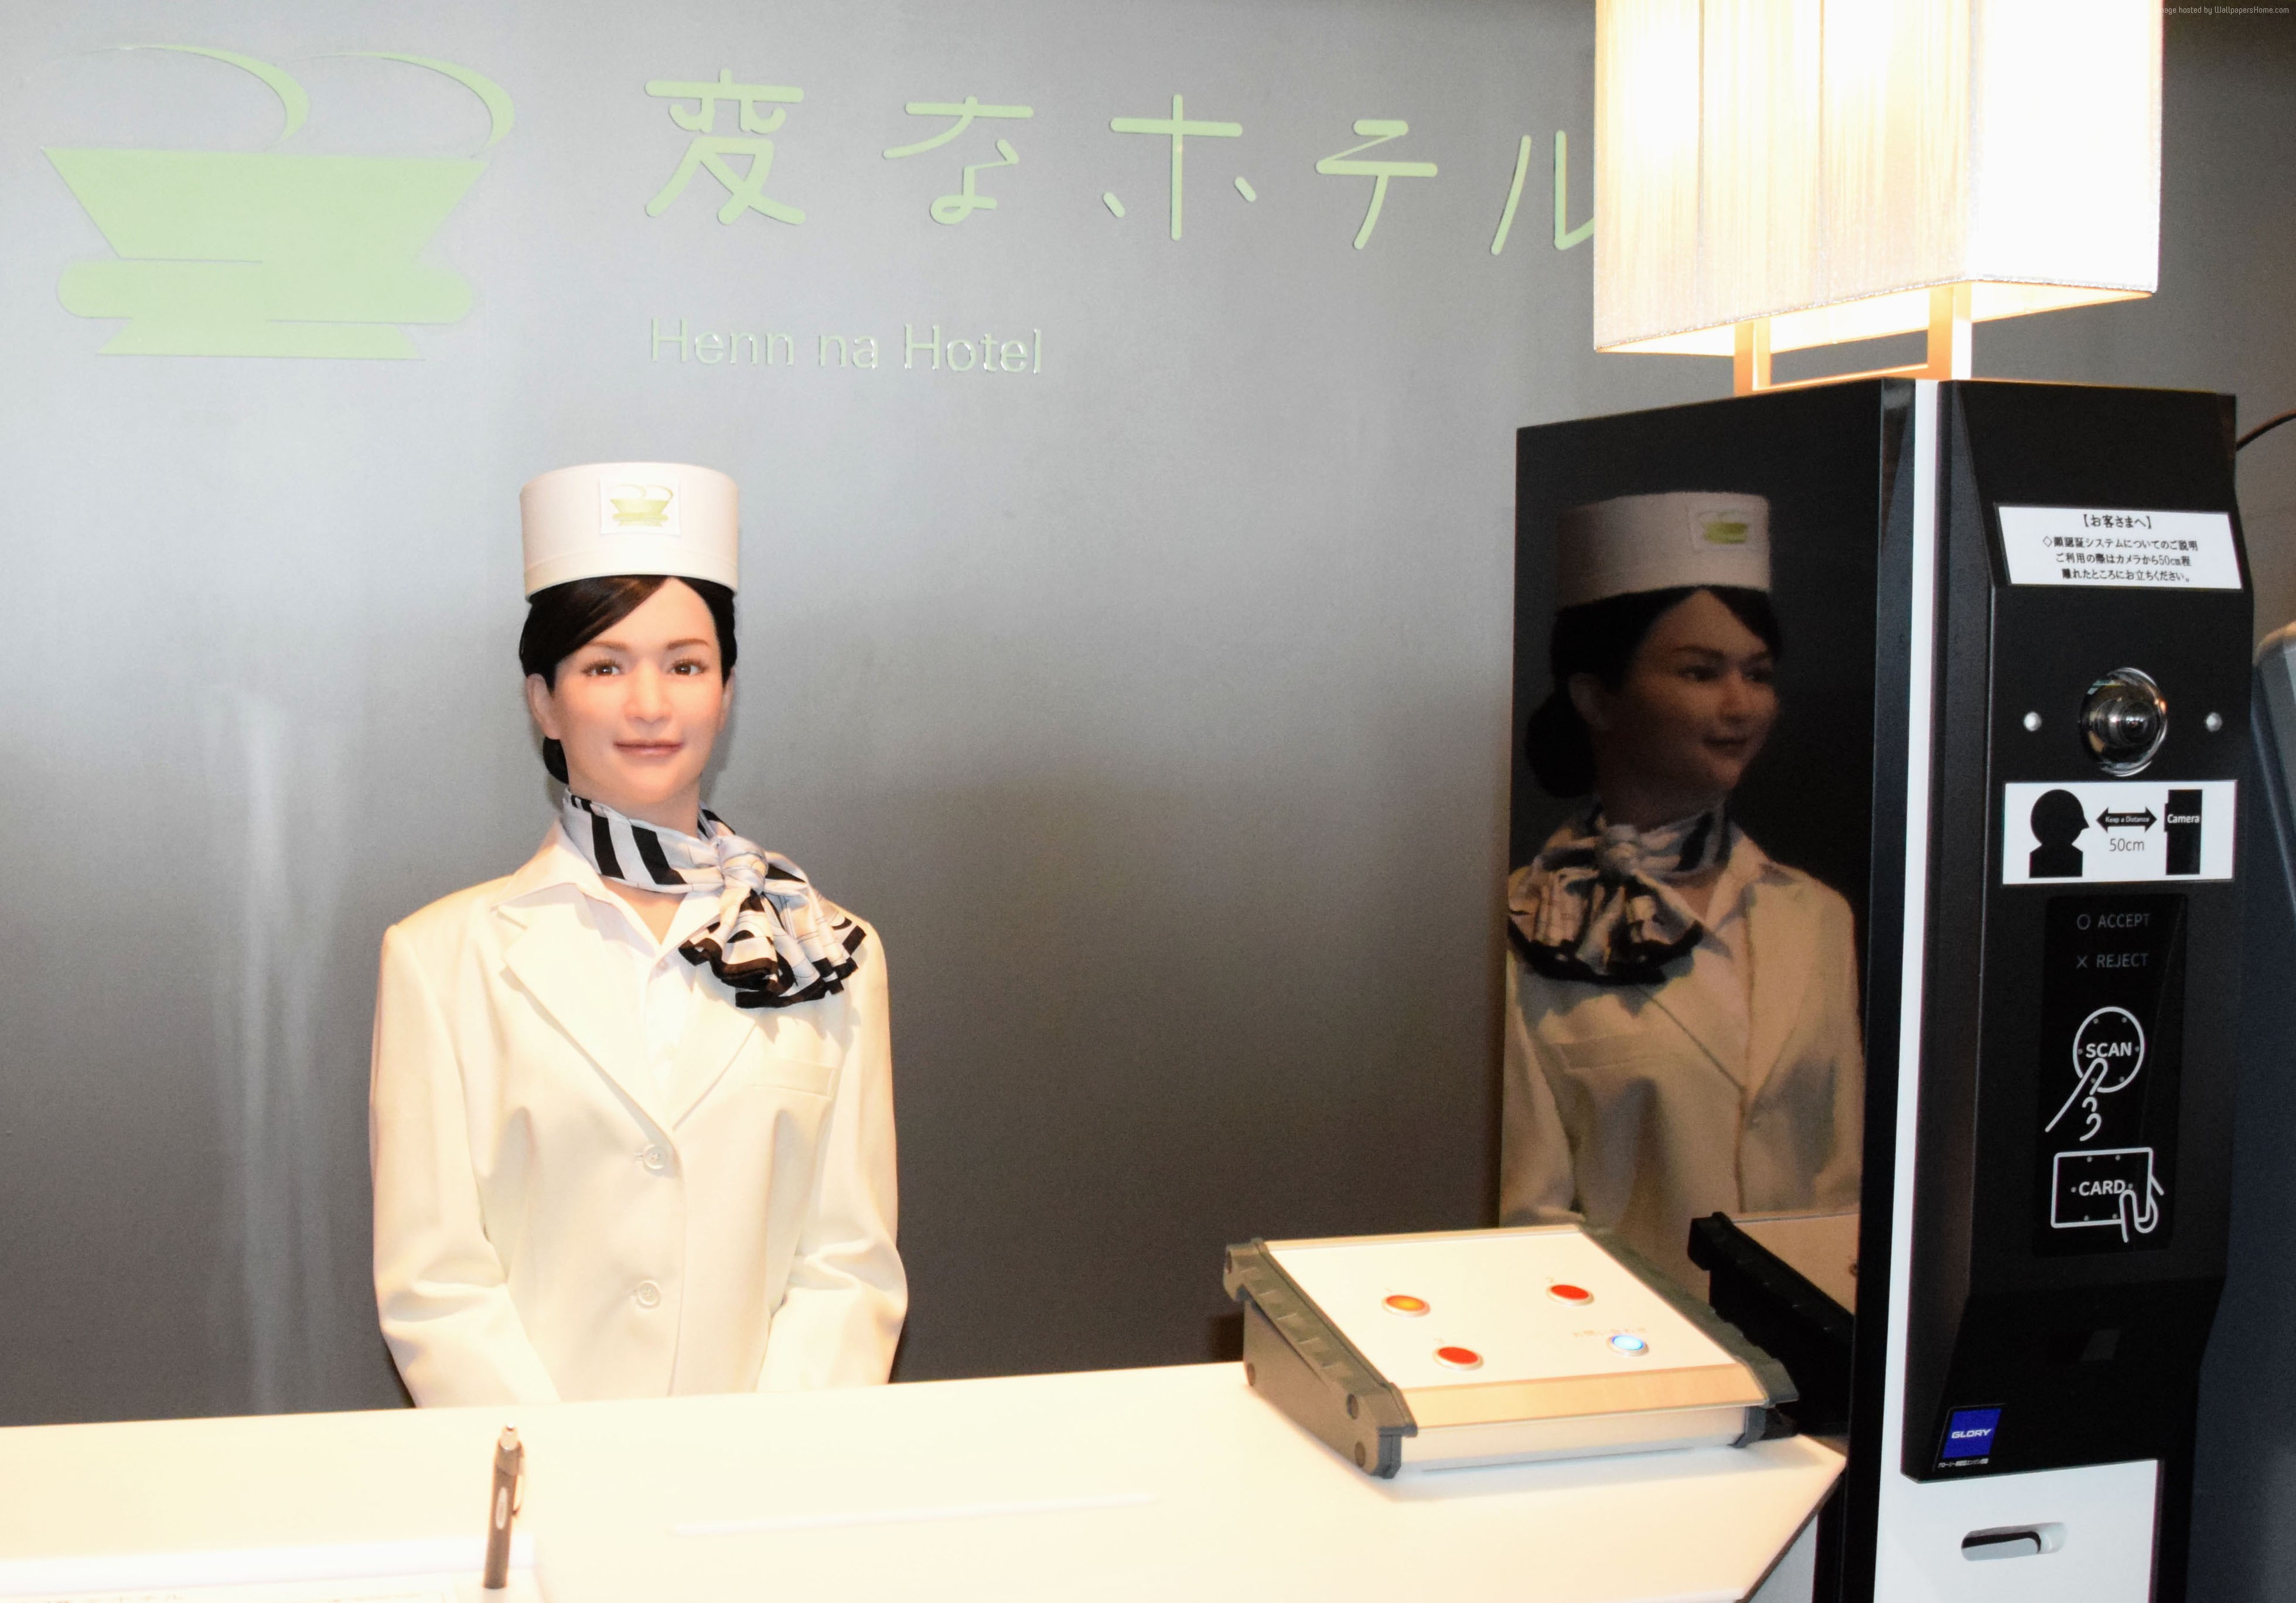 Robot Hotel, Female Robot Receptionist, two people, indoors